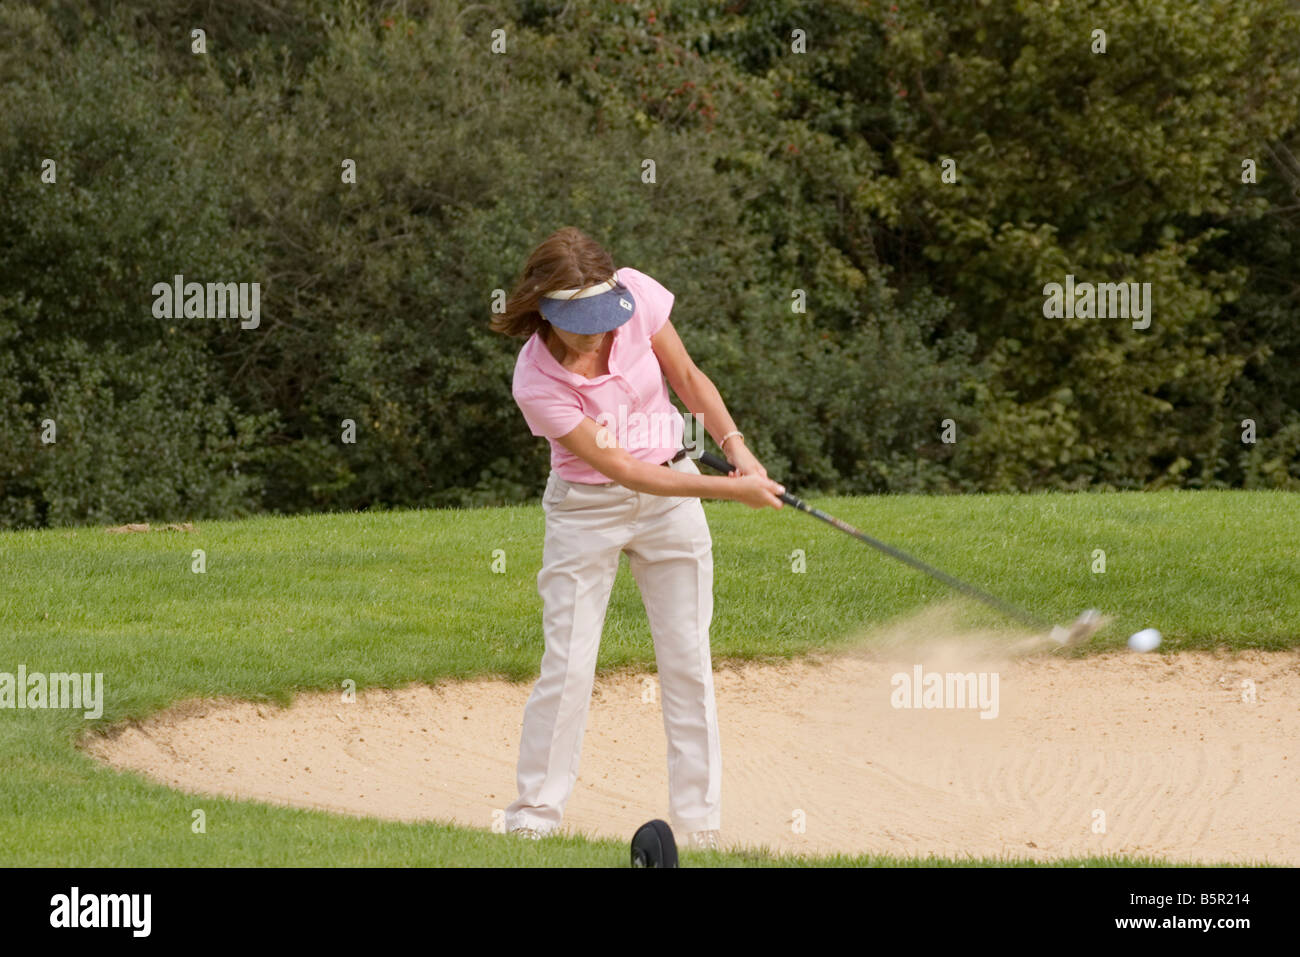 Lady Female Woman person Golfer Playing a Bunker Shot Stock Photo